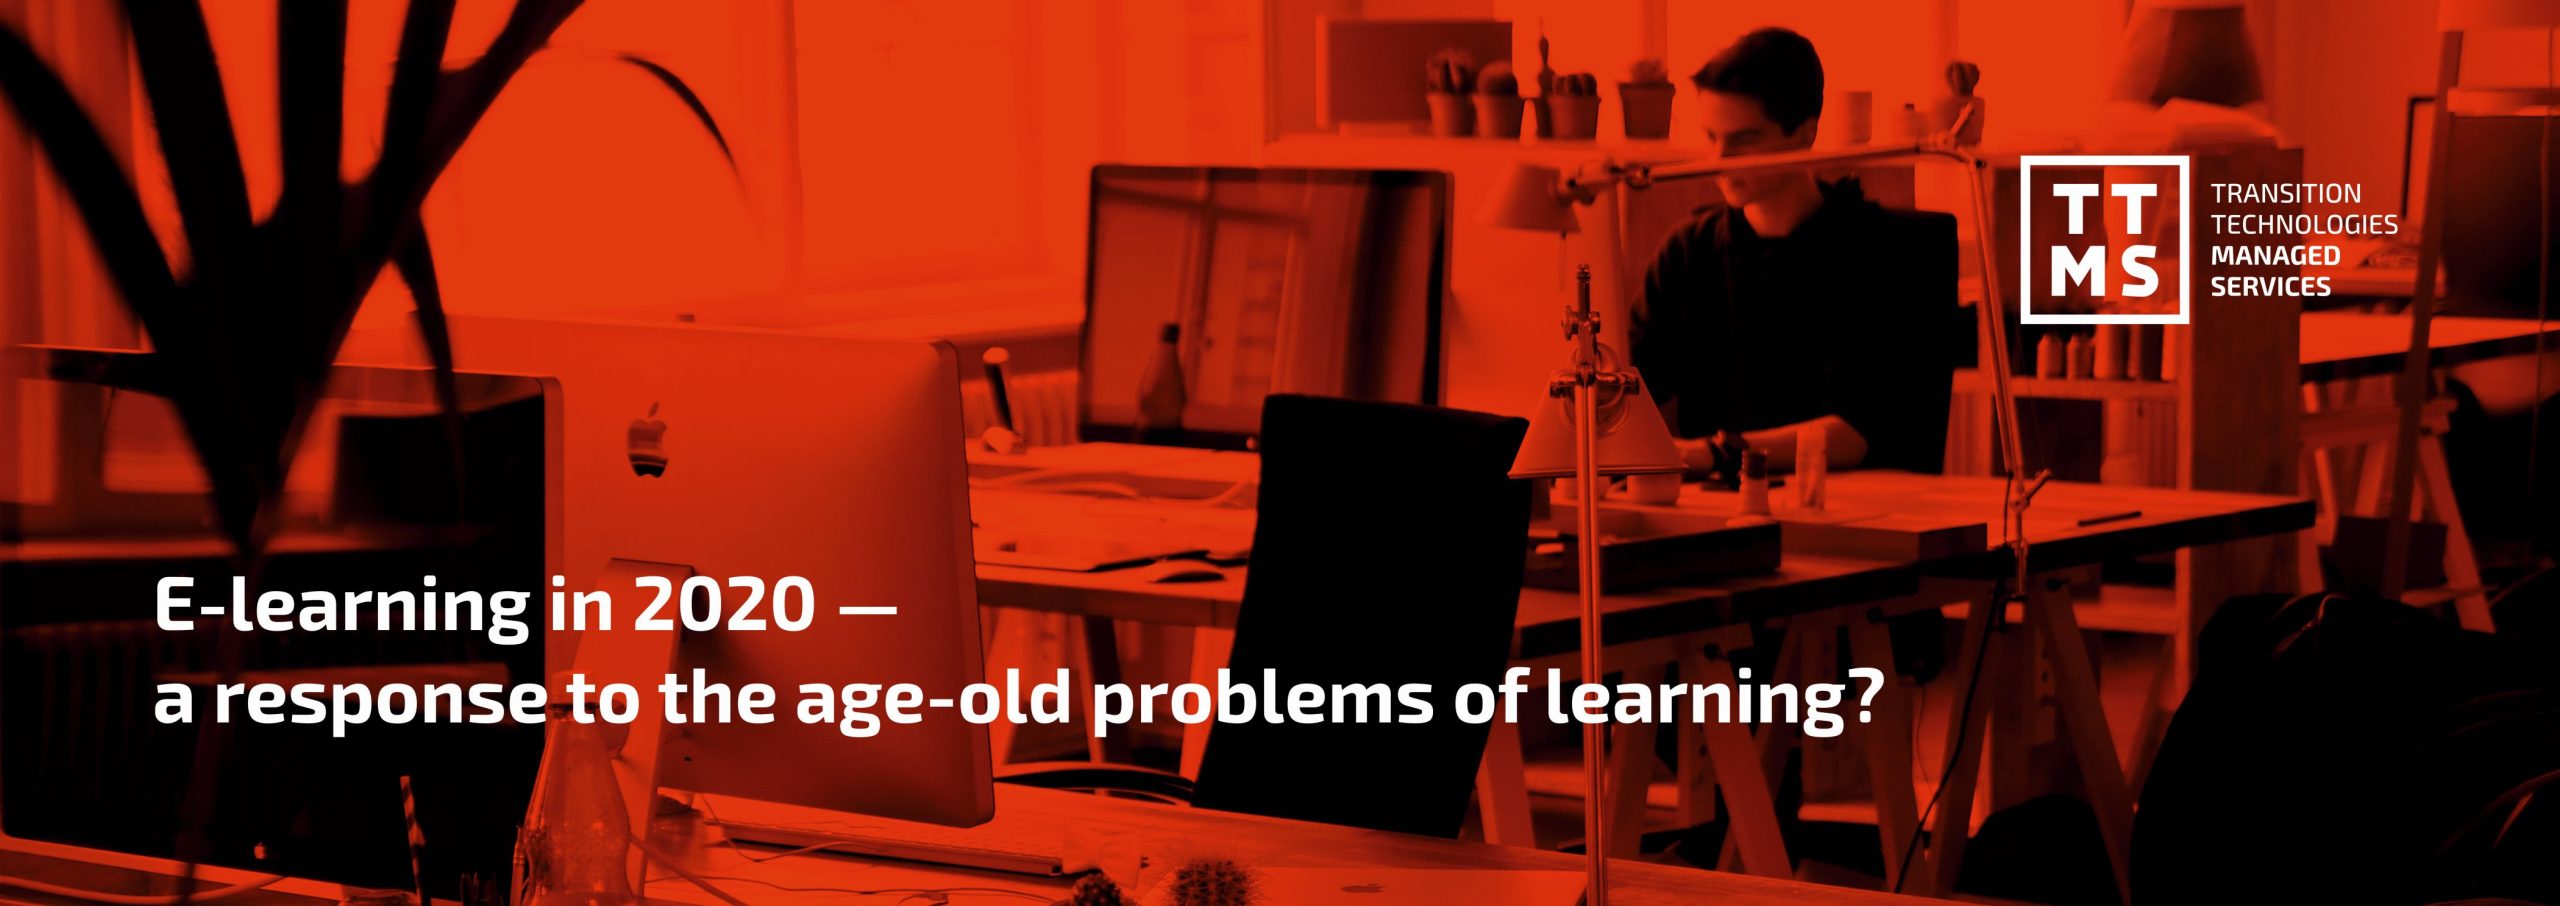 E-learning in 2020 — a response to the age-old problems of learning?